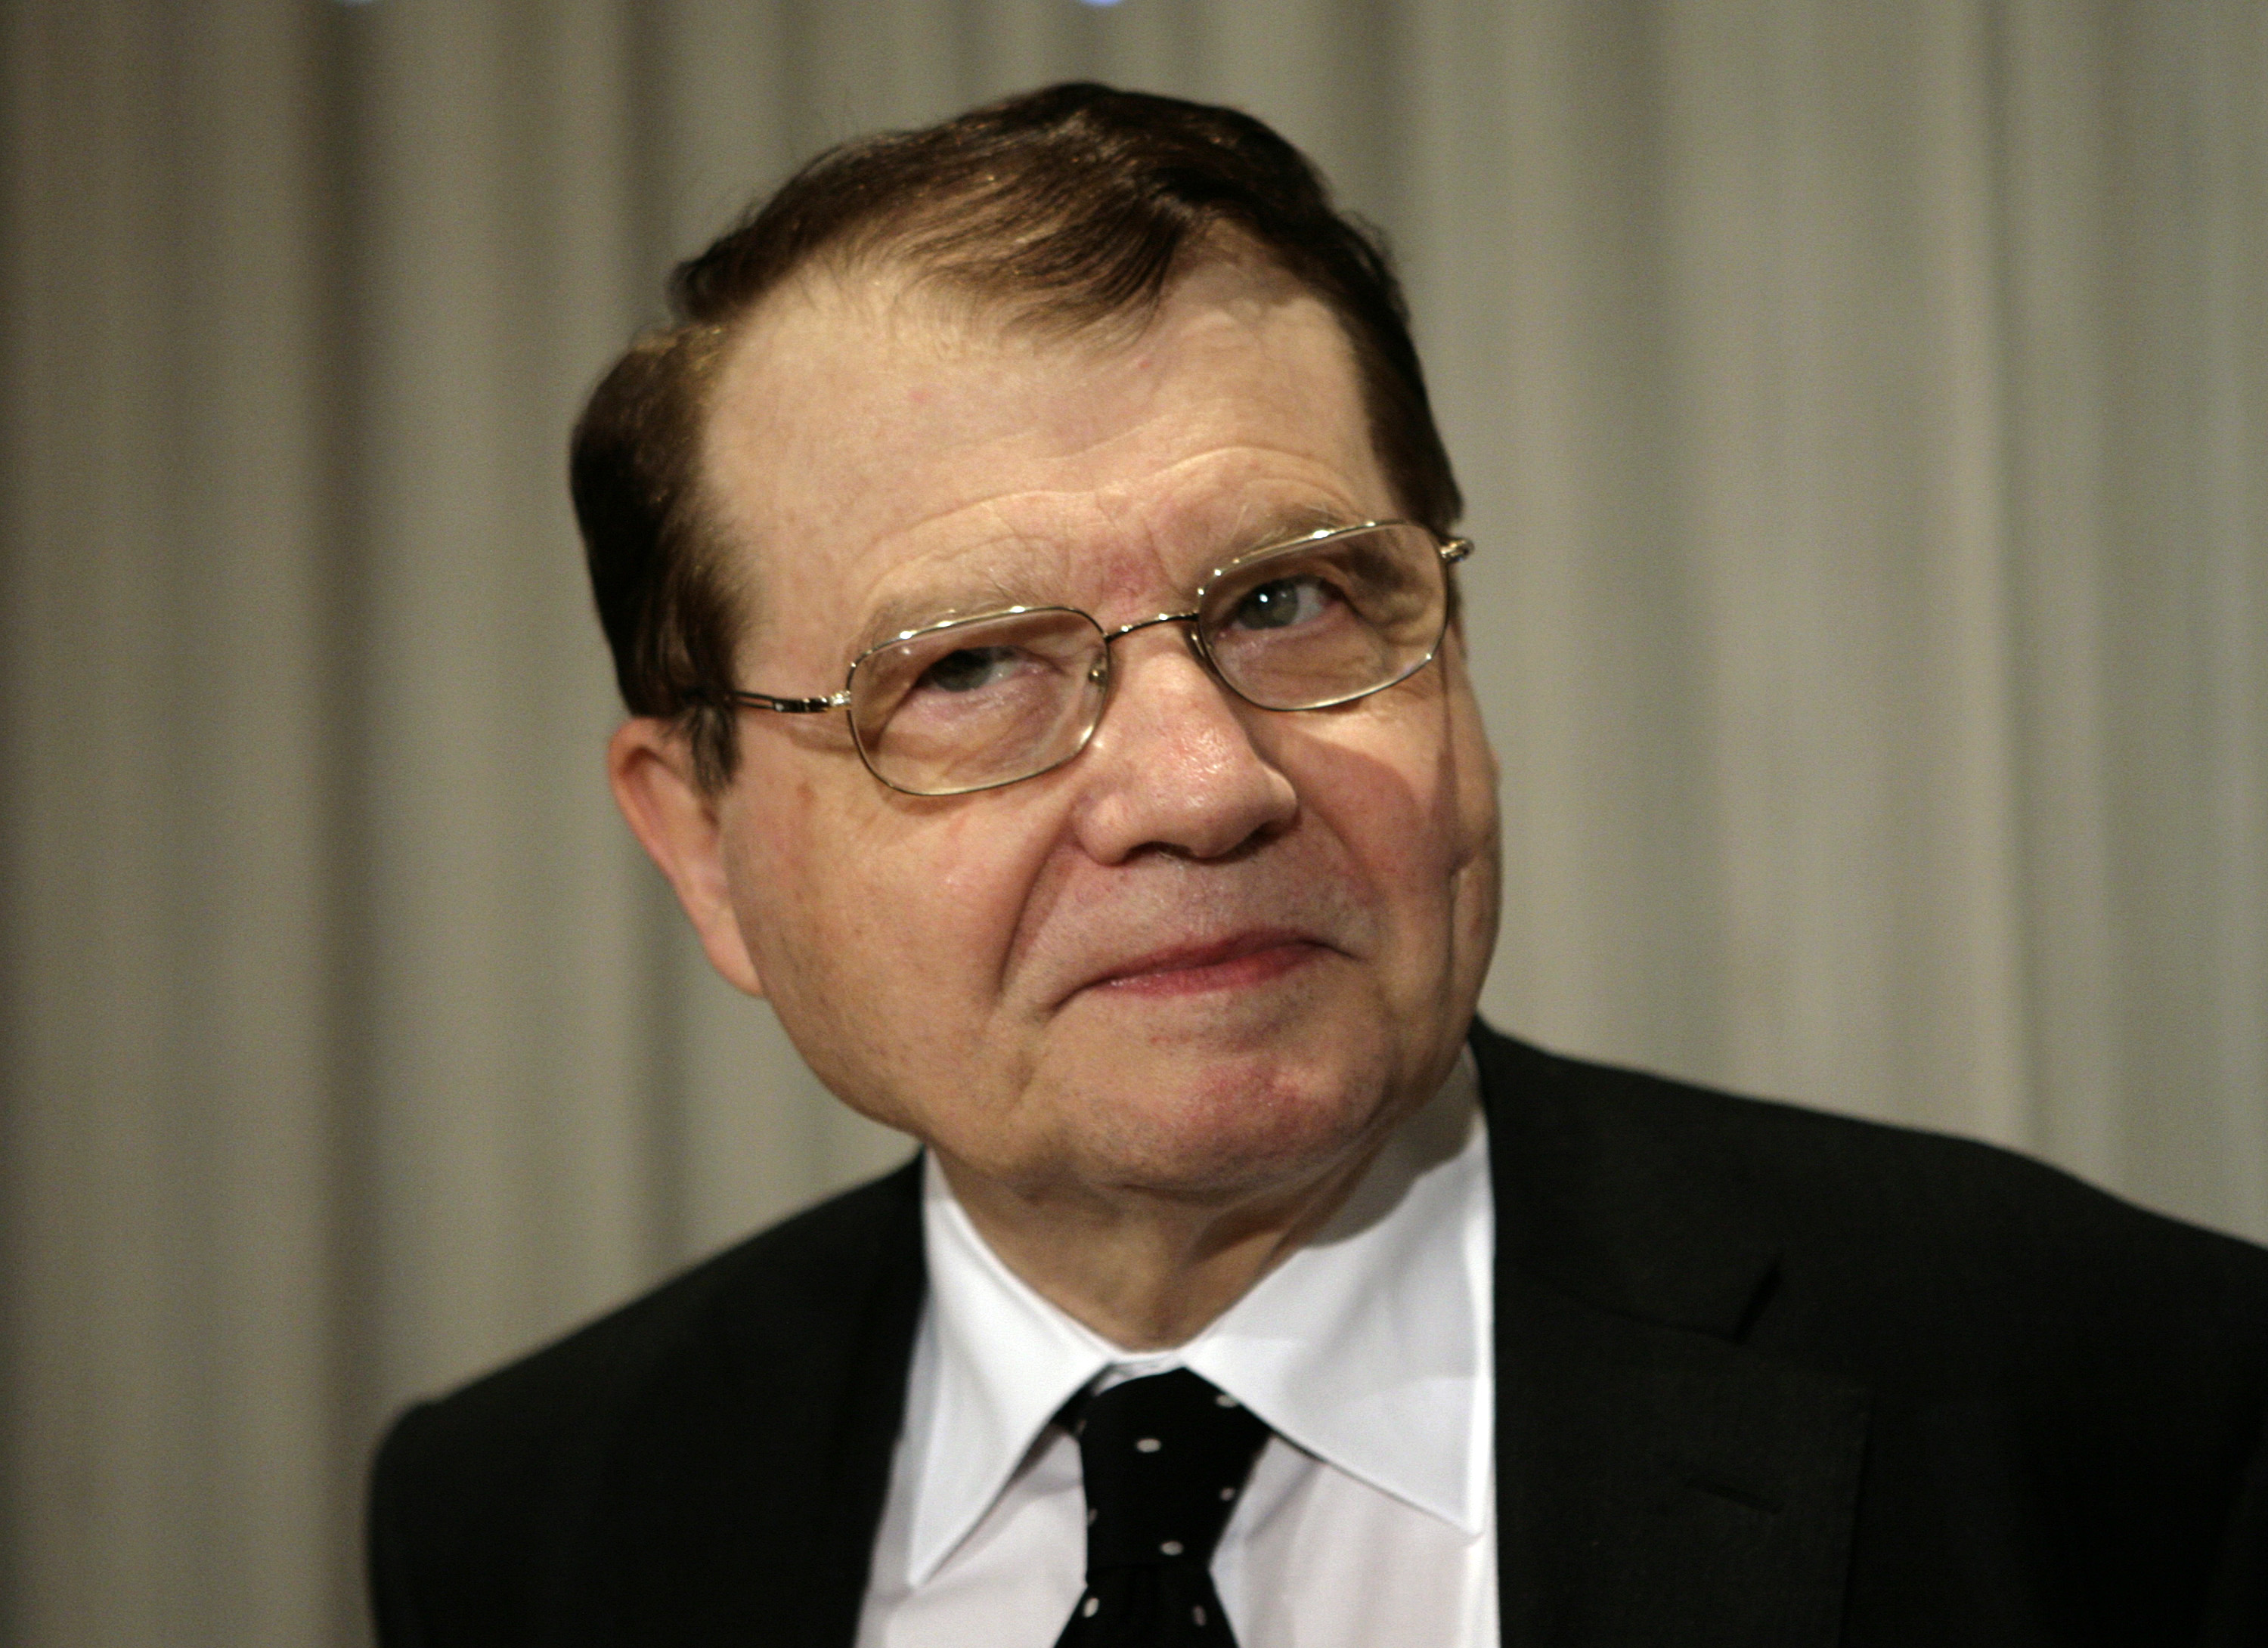 Dr. Luc Montagnier, co-discover of the Human immunodeficiency virus (HIV), arrives for a news conference at the National Press Club in Washington